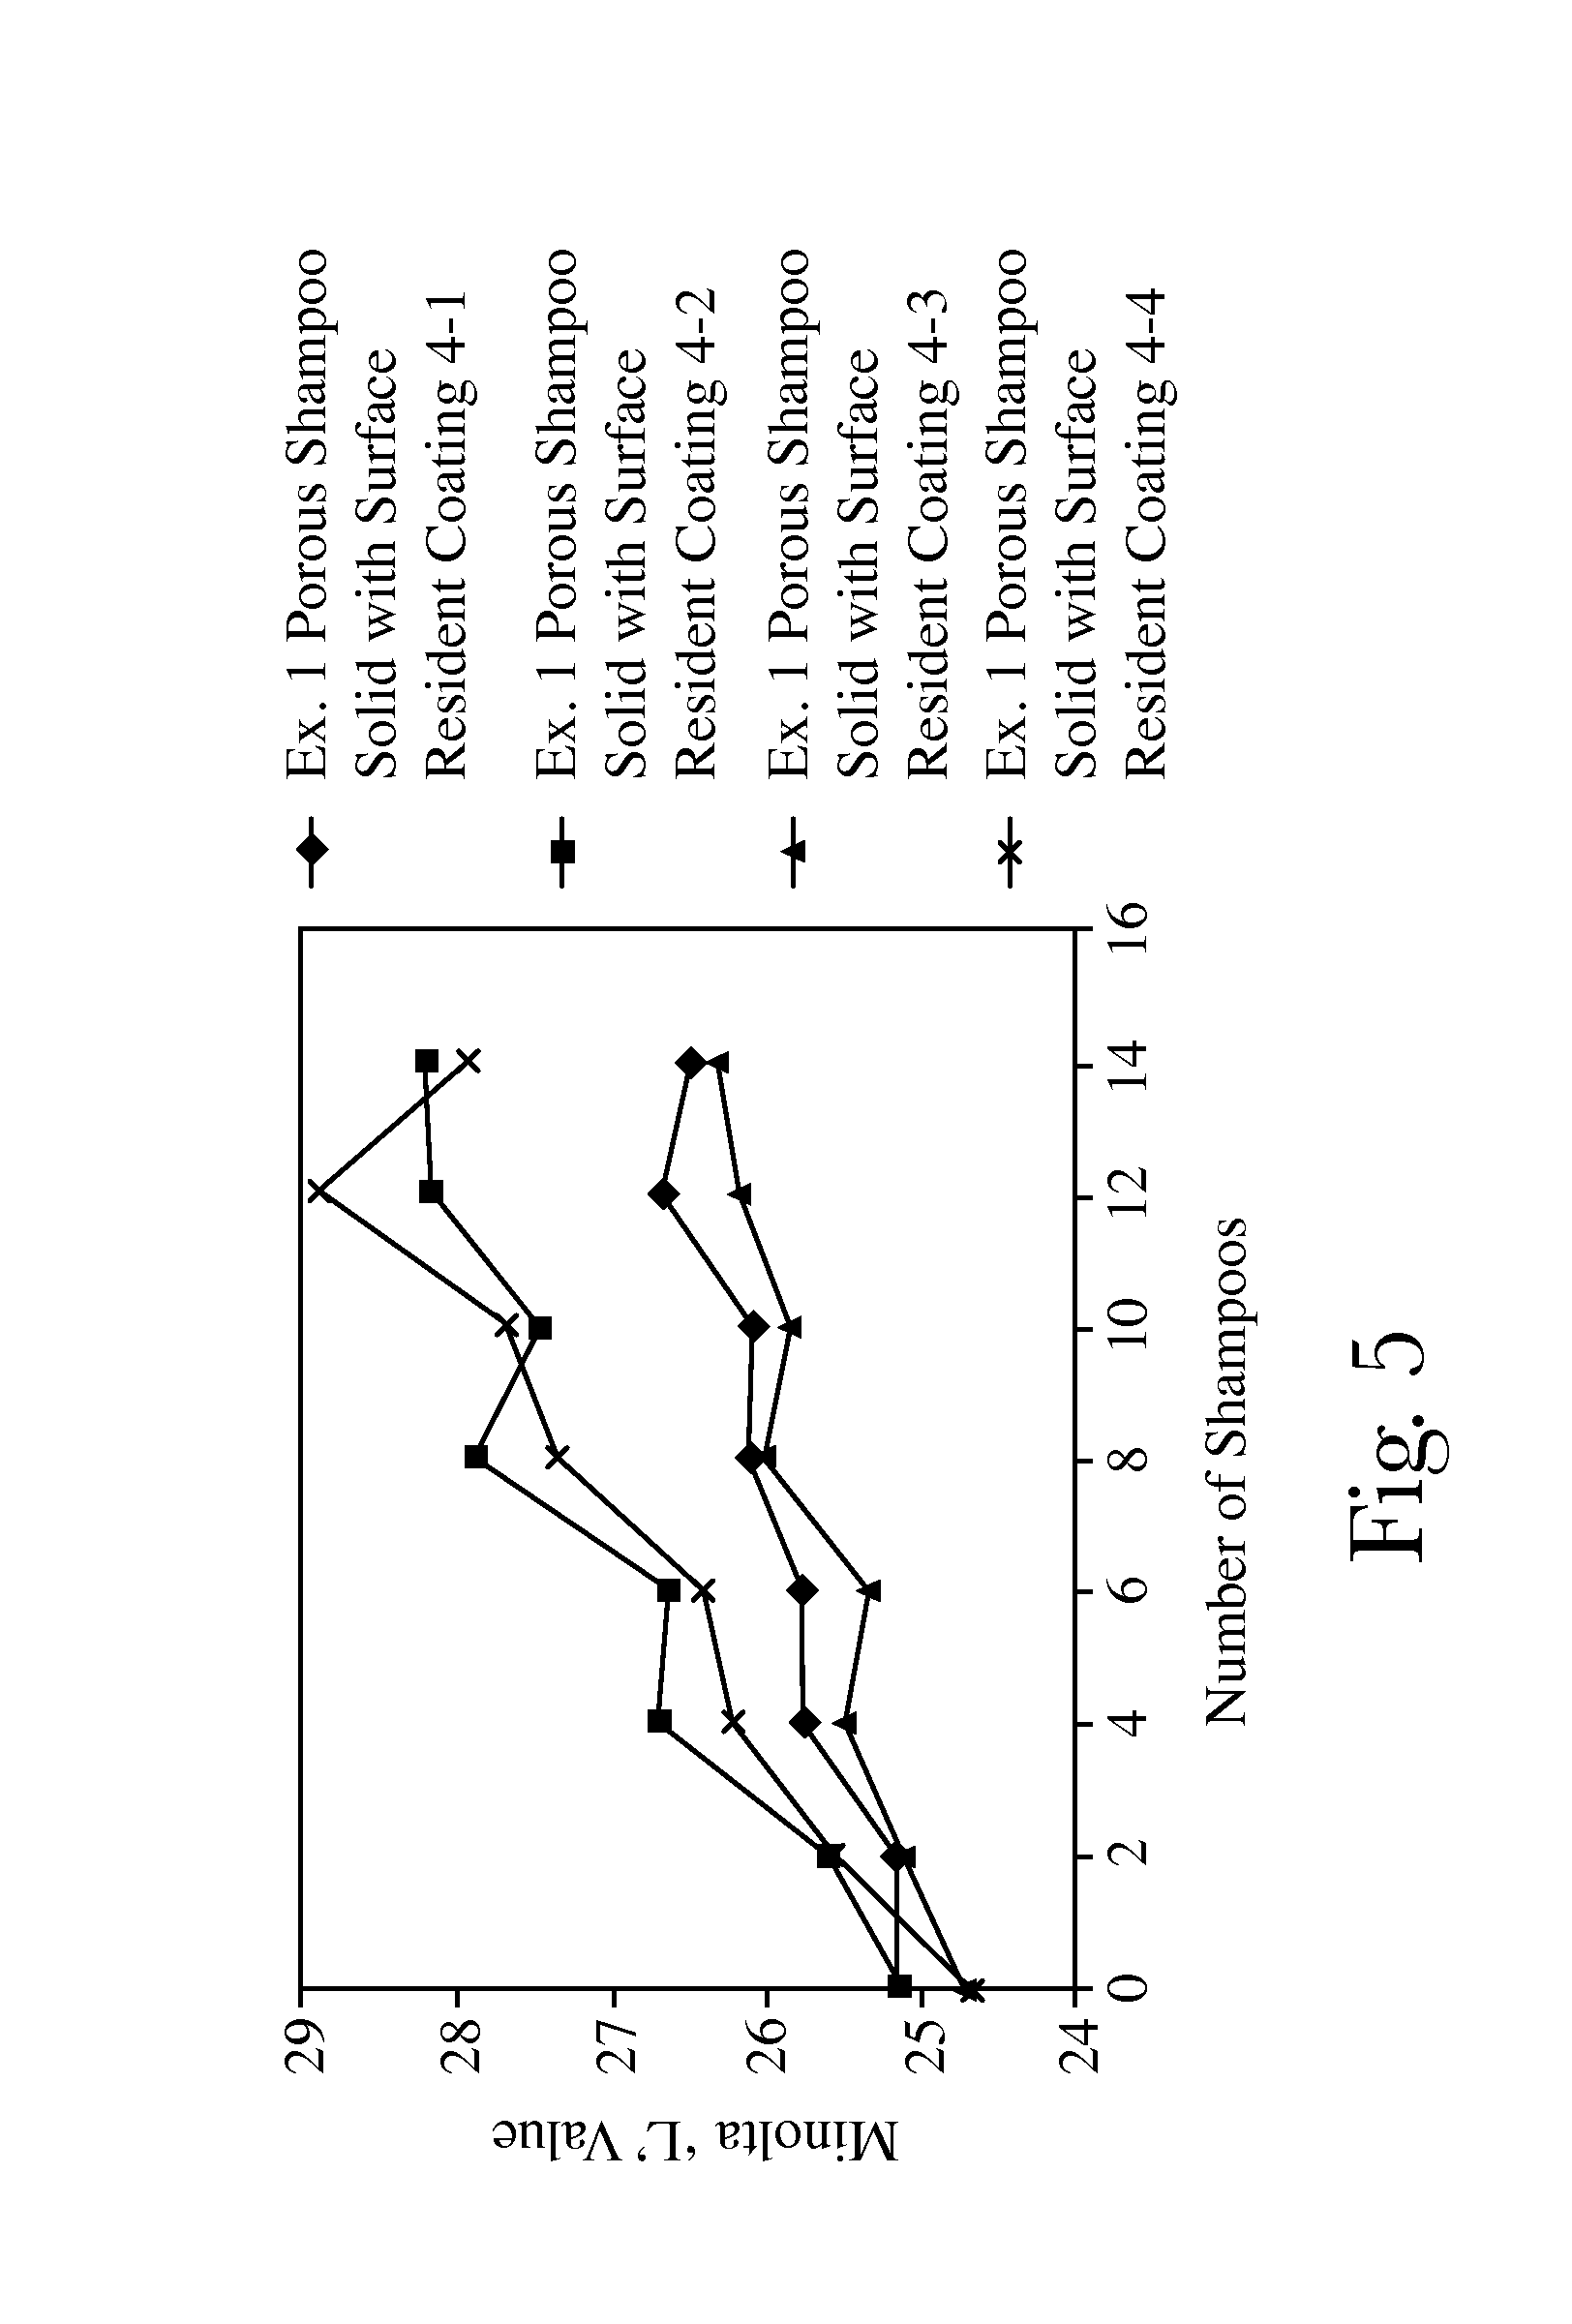 Porous, dissolvable solid substrate and surface resident coating comprising water sensitive actives